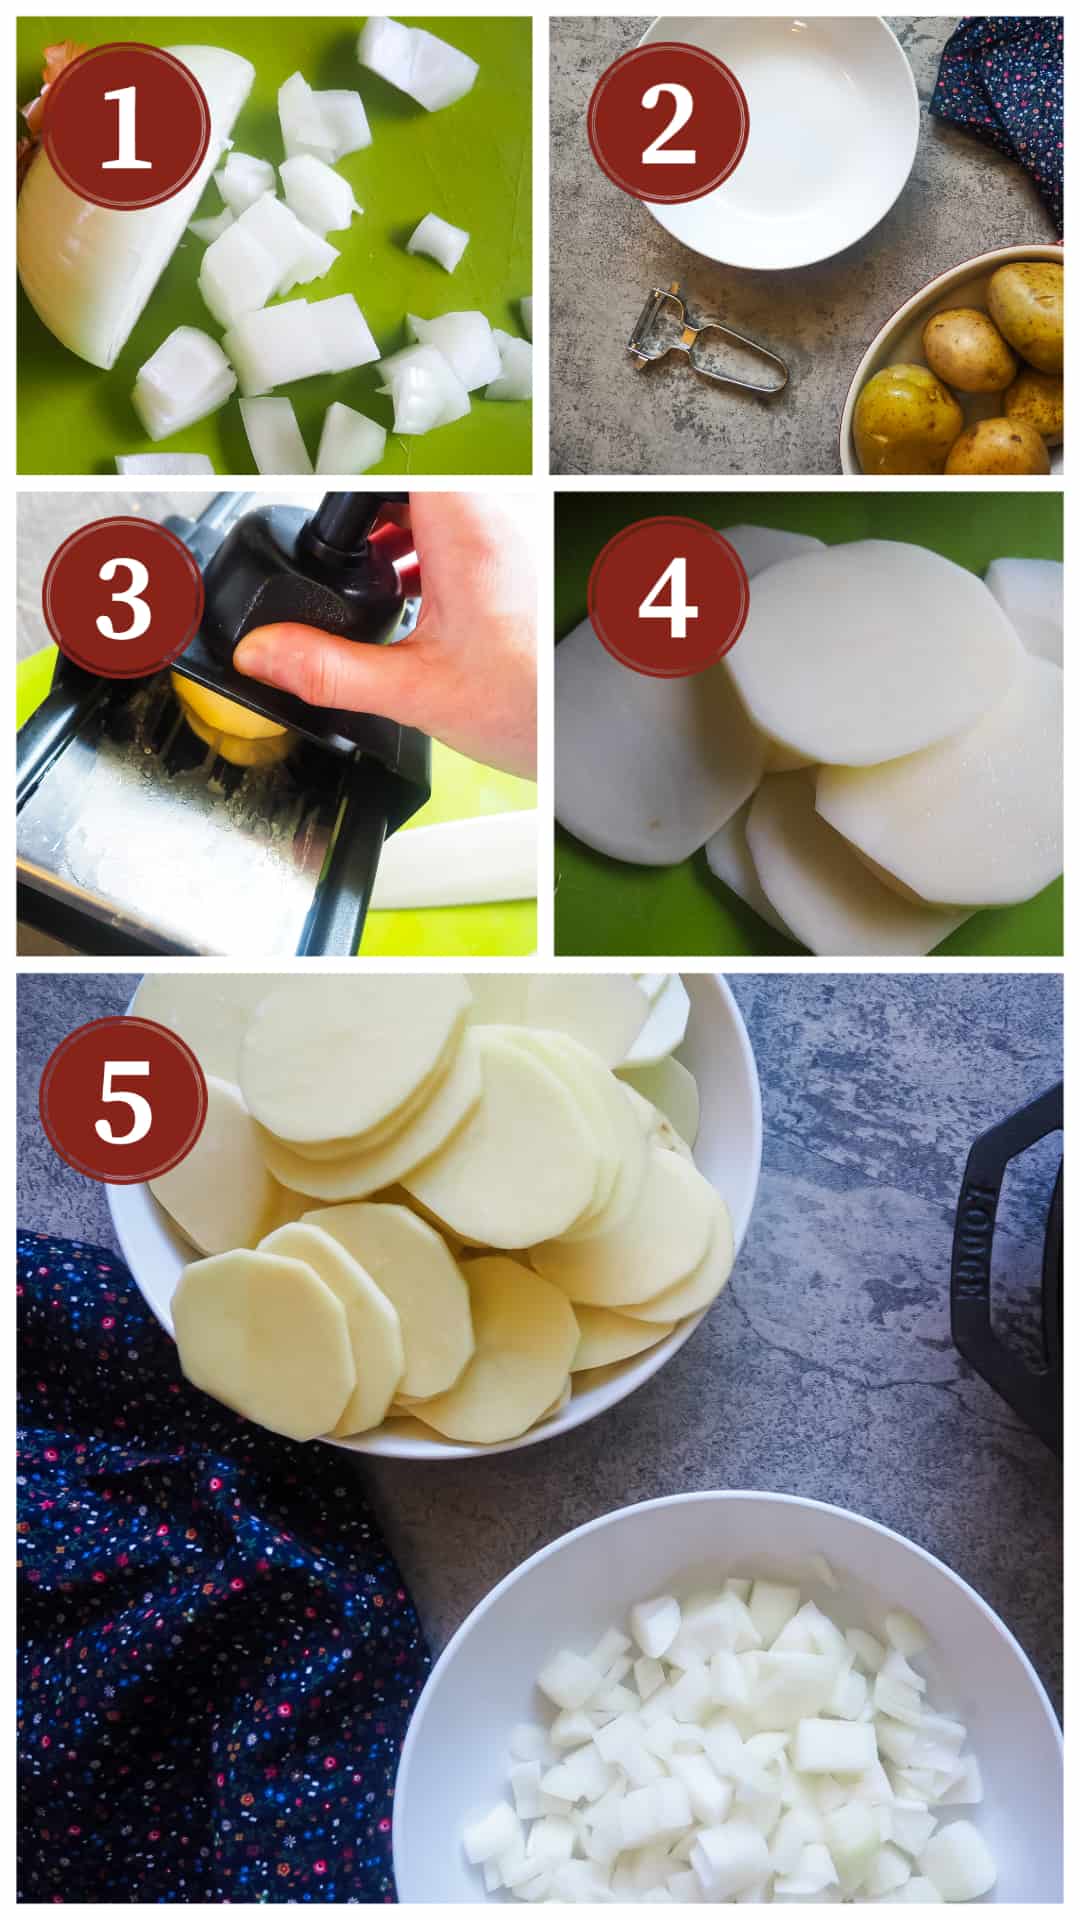 A collage of images showing the process of making a Spanish tortilla, steps 1 - 5.